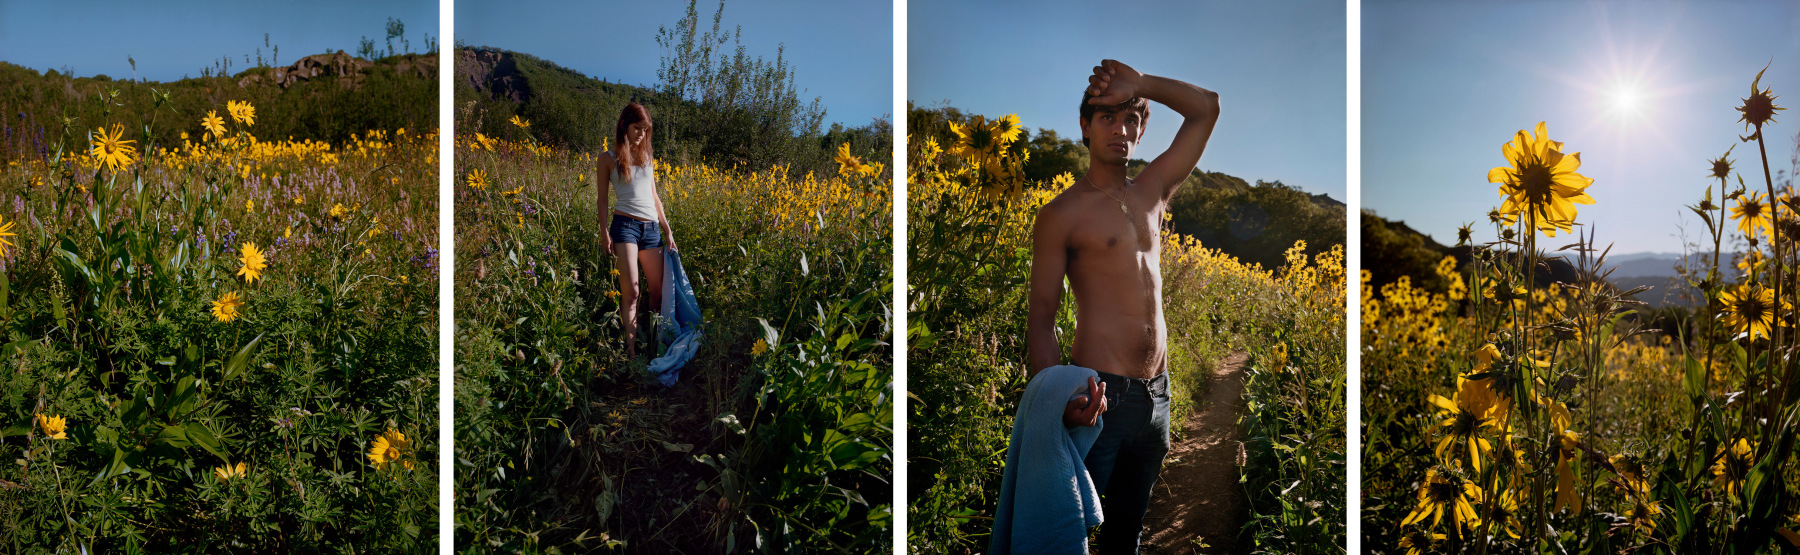 Yellow, Blue, 2012. Four-panel archival pigment print, available as&nbsp;24 x 90 or 40 x 120 inches.&nbsp;